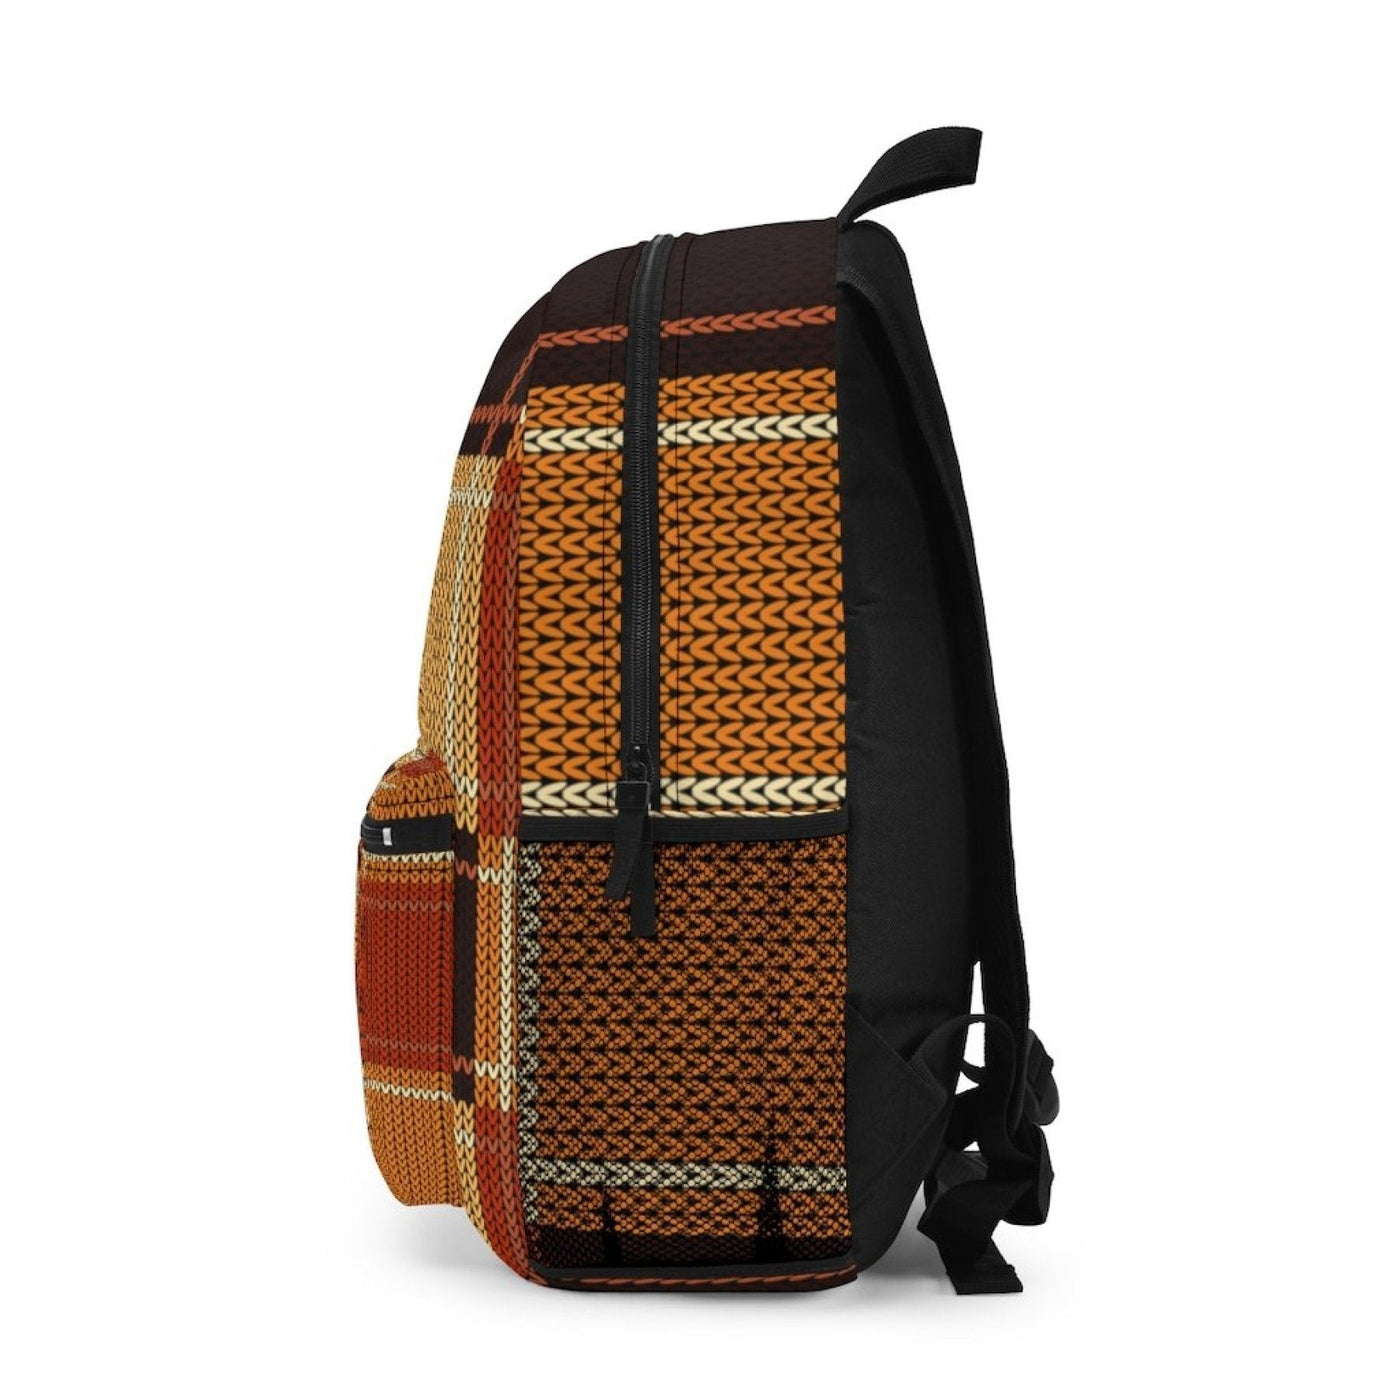 Backpack - Large Water-resistant Bag Brown And Tan Checkered Squares - Bags